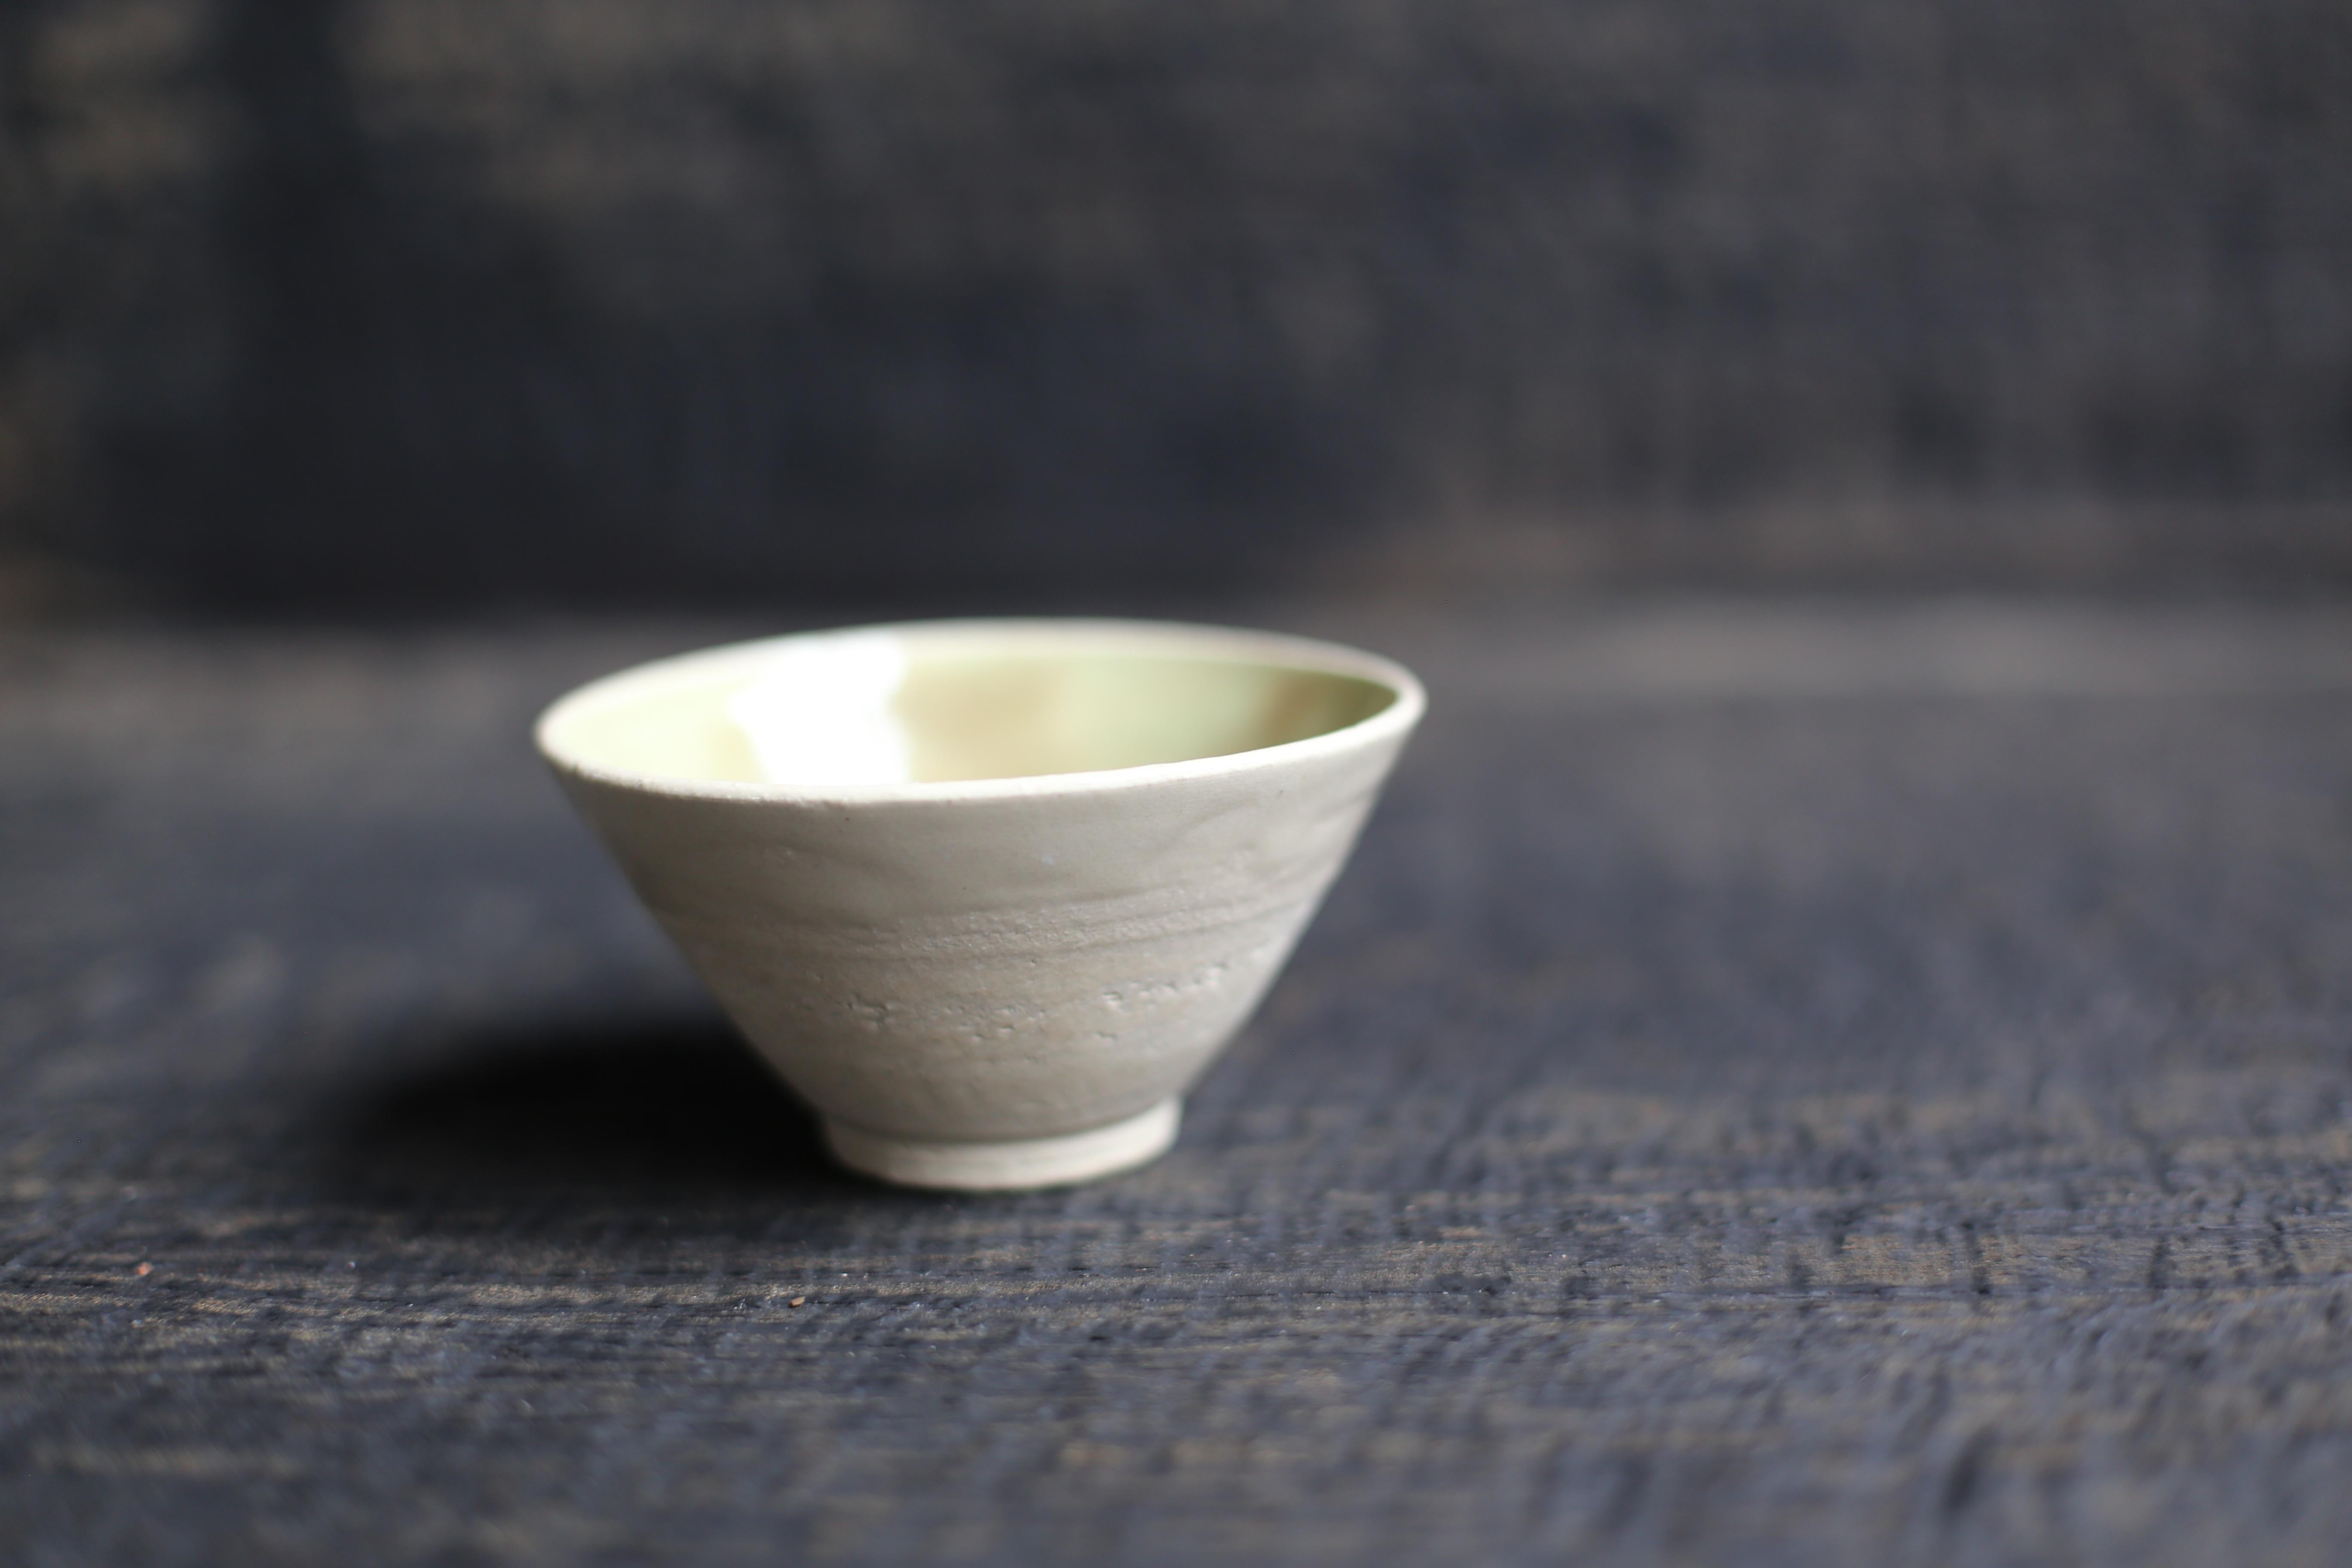 Cup in white clay with pastel green + sheer glaze
2022s / Belgium
Size : f110 h60 mm
Artist : Sigrid Volders


[Sigrid Volders]
Based in Antwerp, Belgium, she works vigorously as a ceramic artist, mainly as a hair-making artist active in